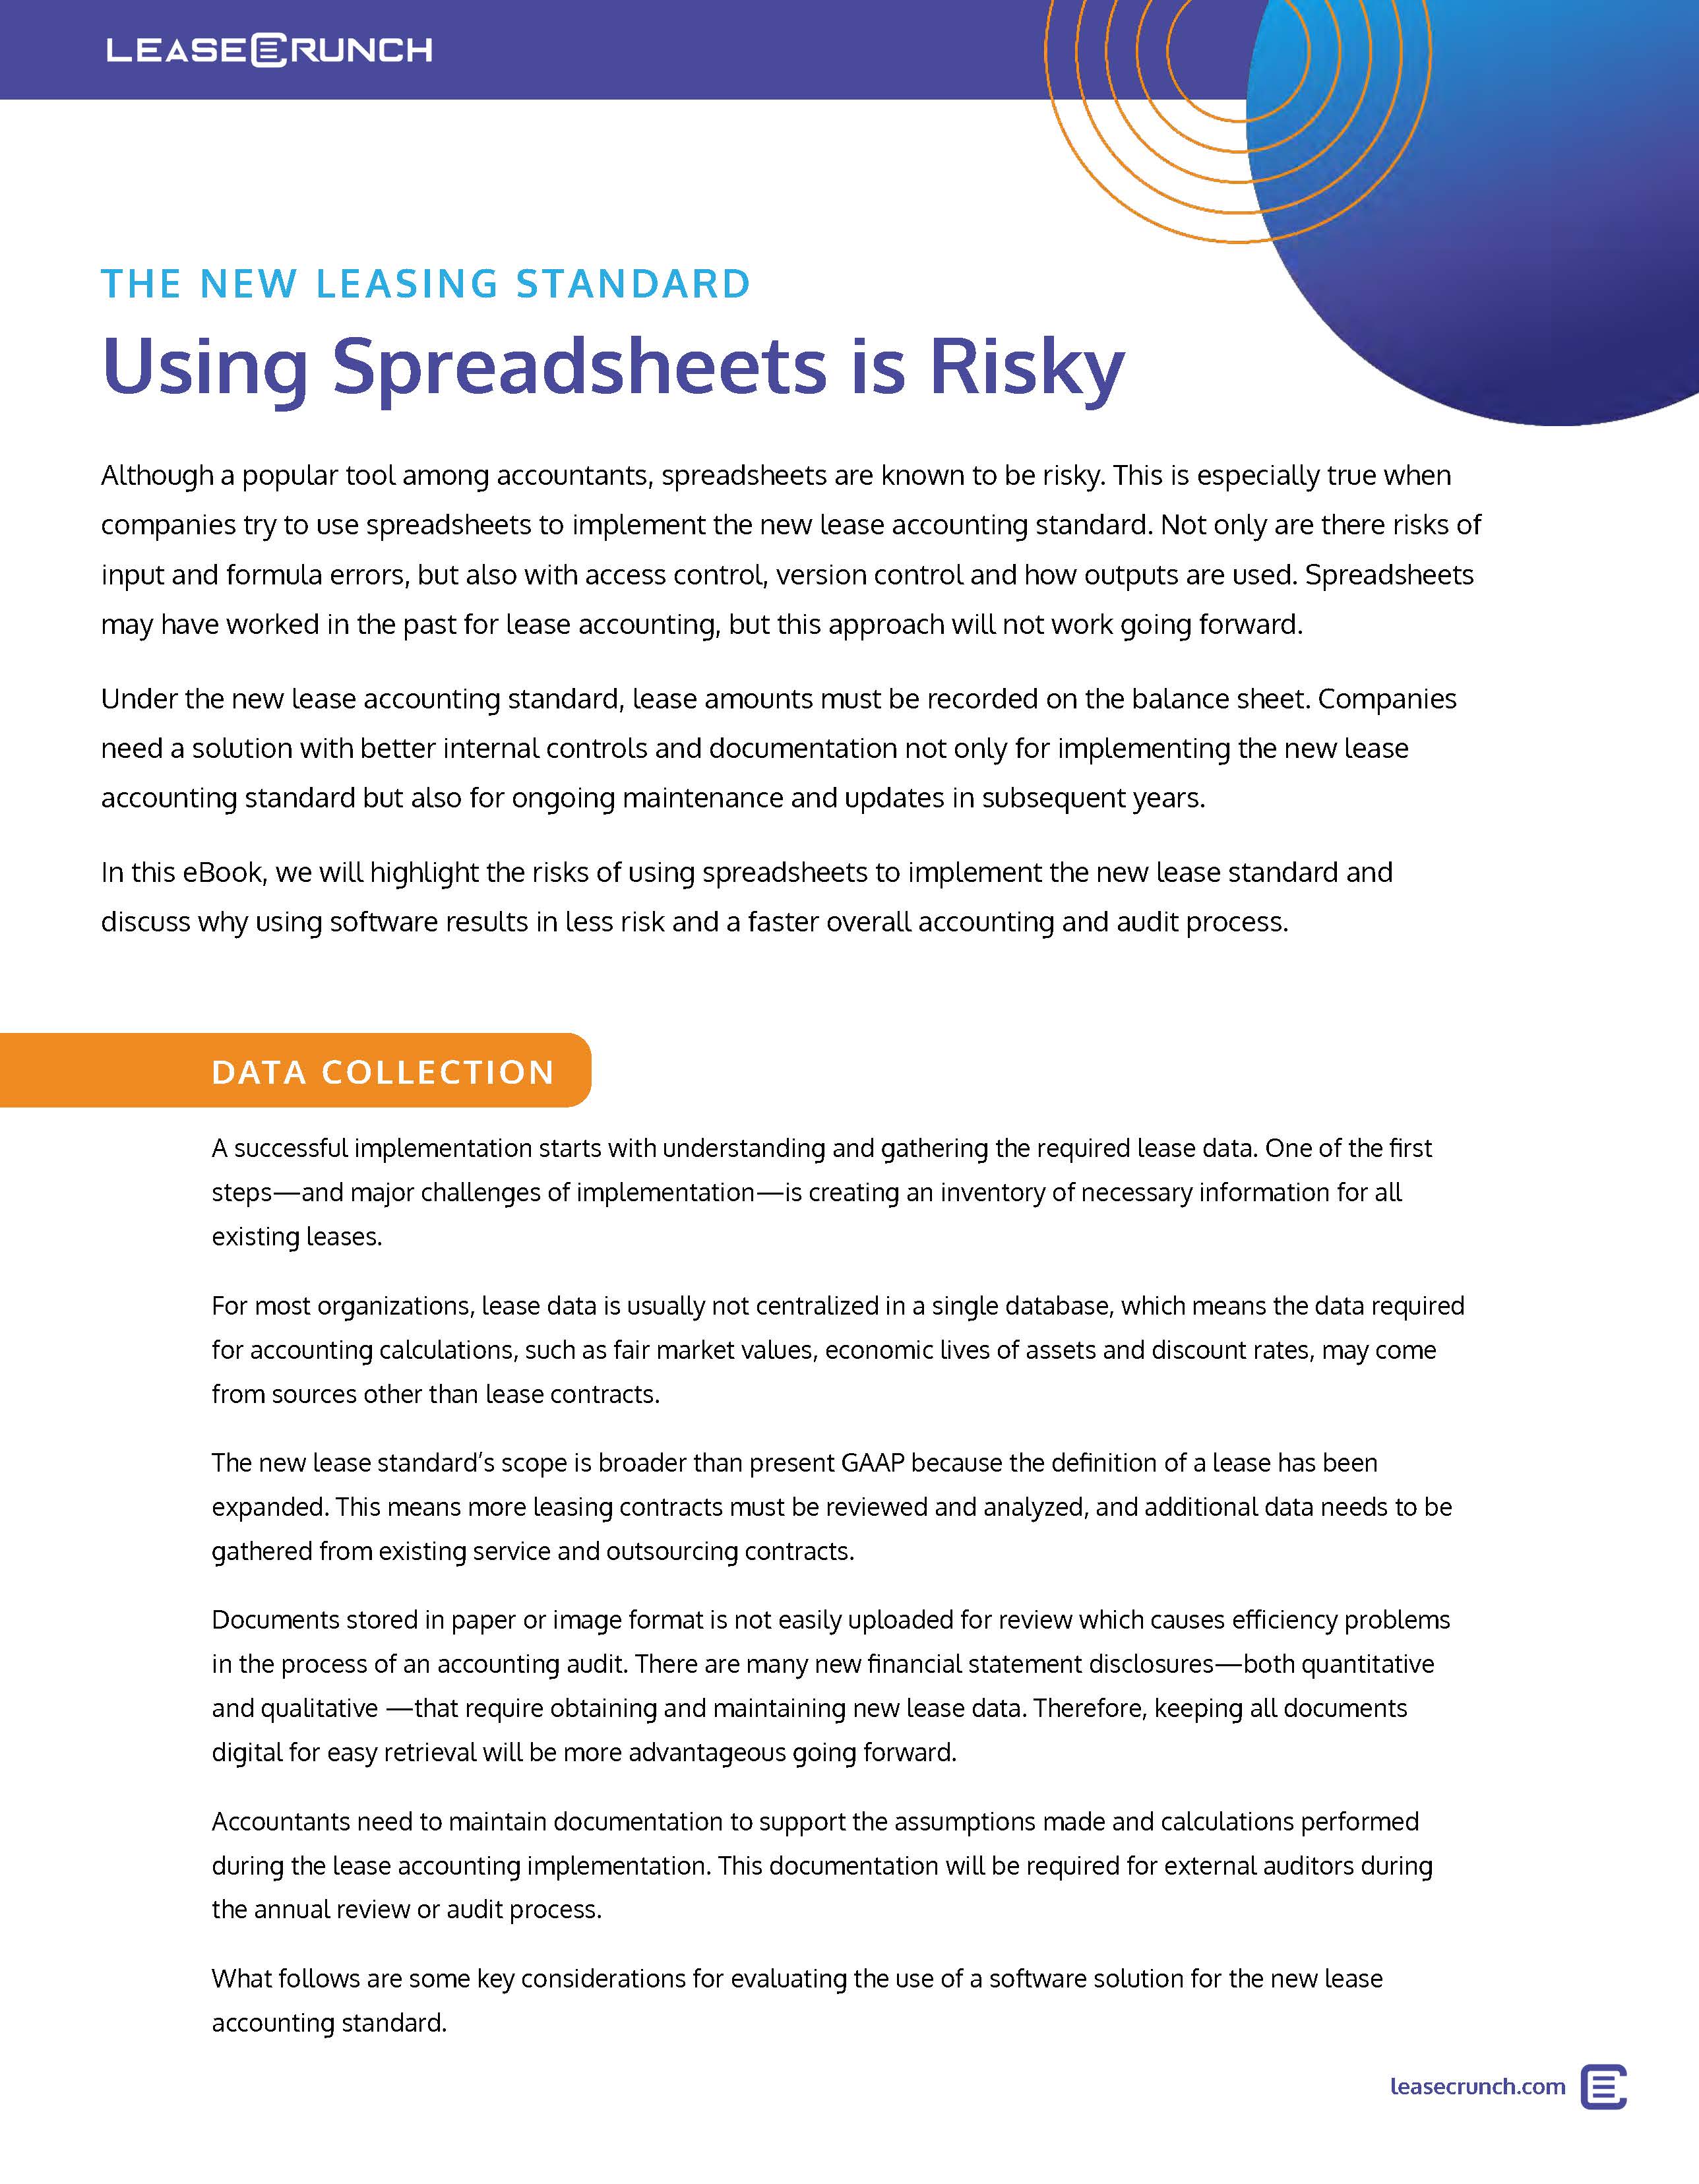 Spreadsheet_Risks_Page_1